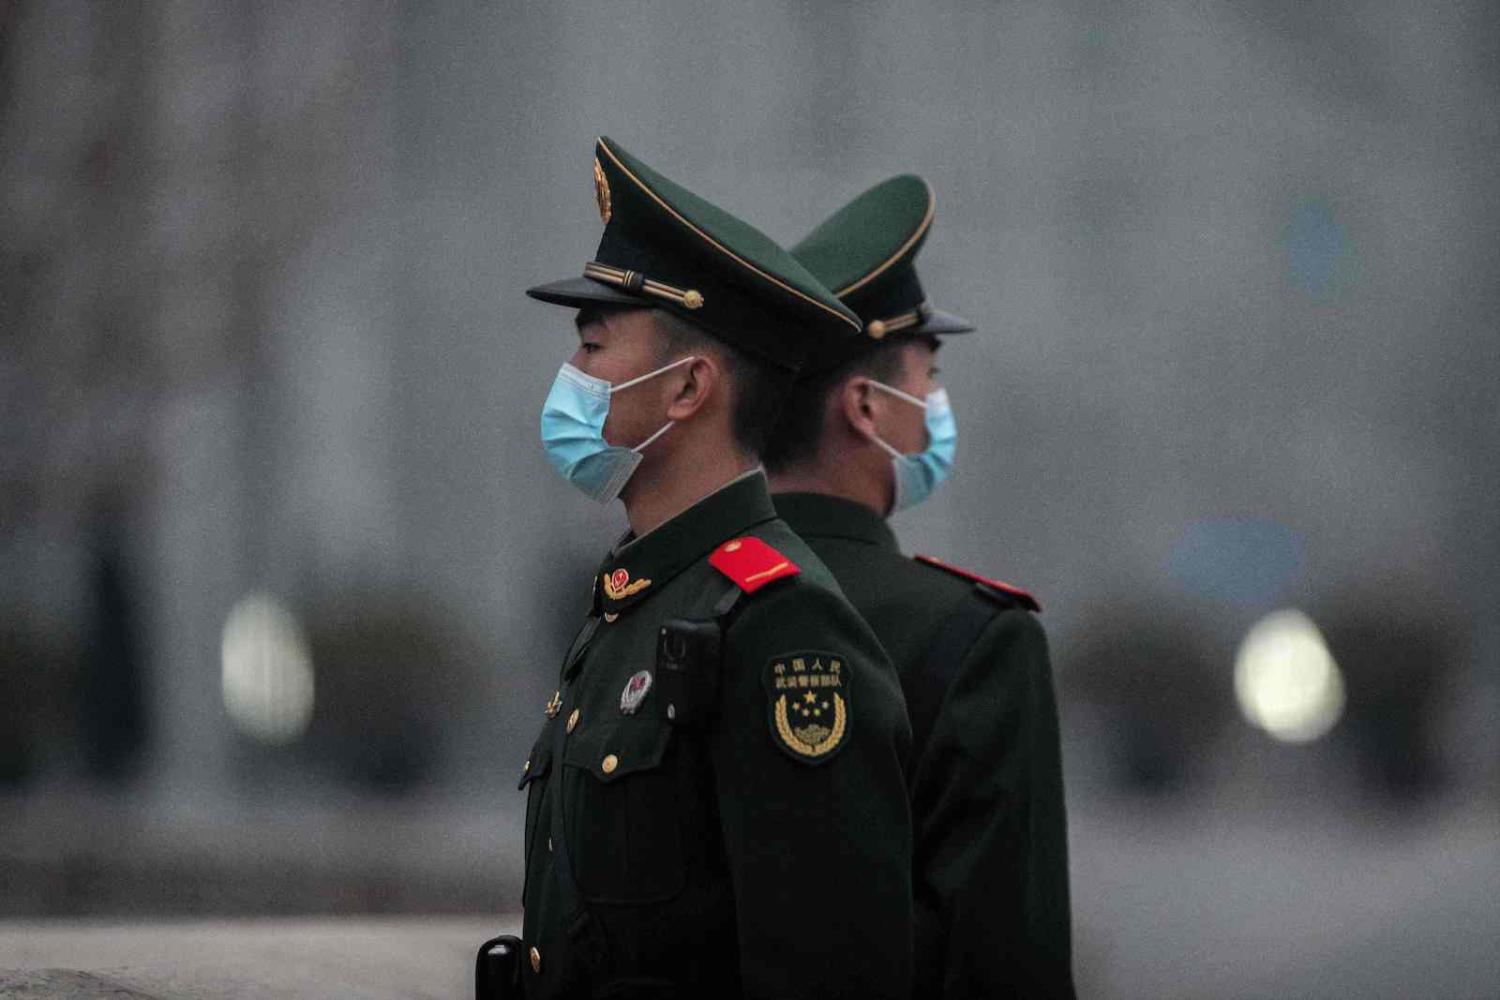 Beijing has calculated that as China gained stature as a superpower Southeast Asian nations would not, and could not, challenge its economic and military might (Nicolas Asfouri/AFP via Getty Images)